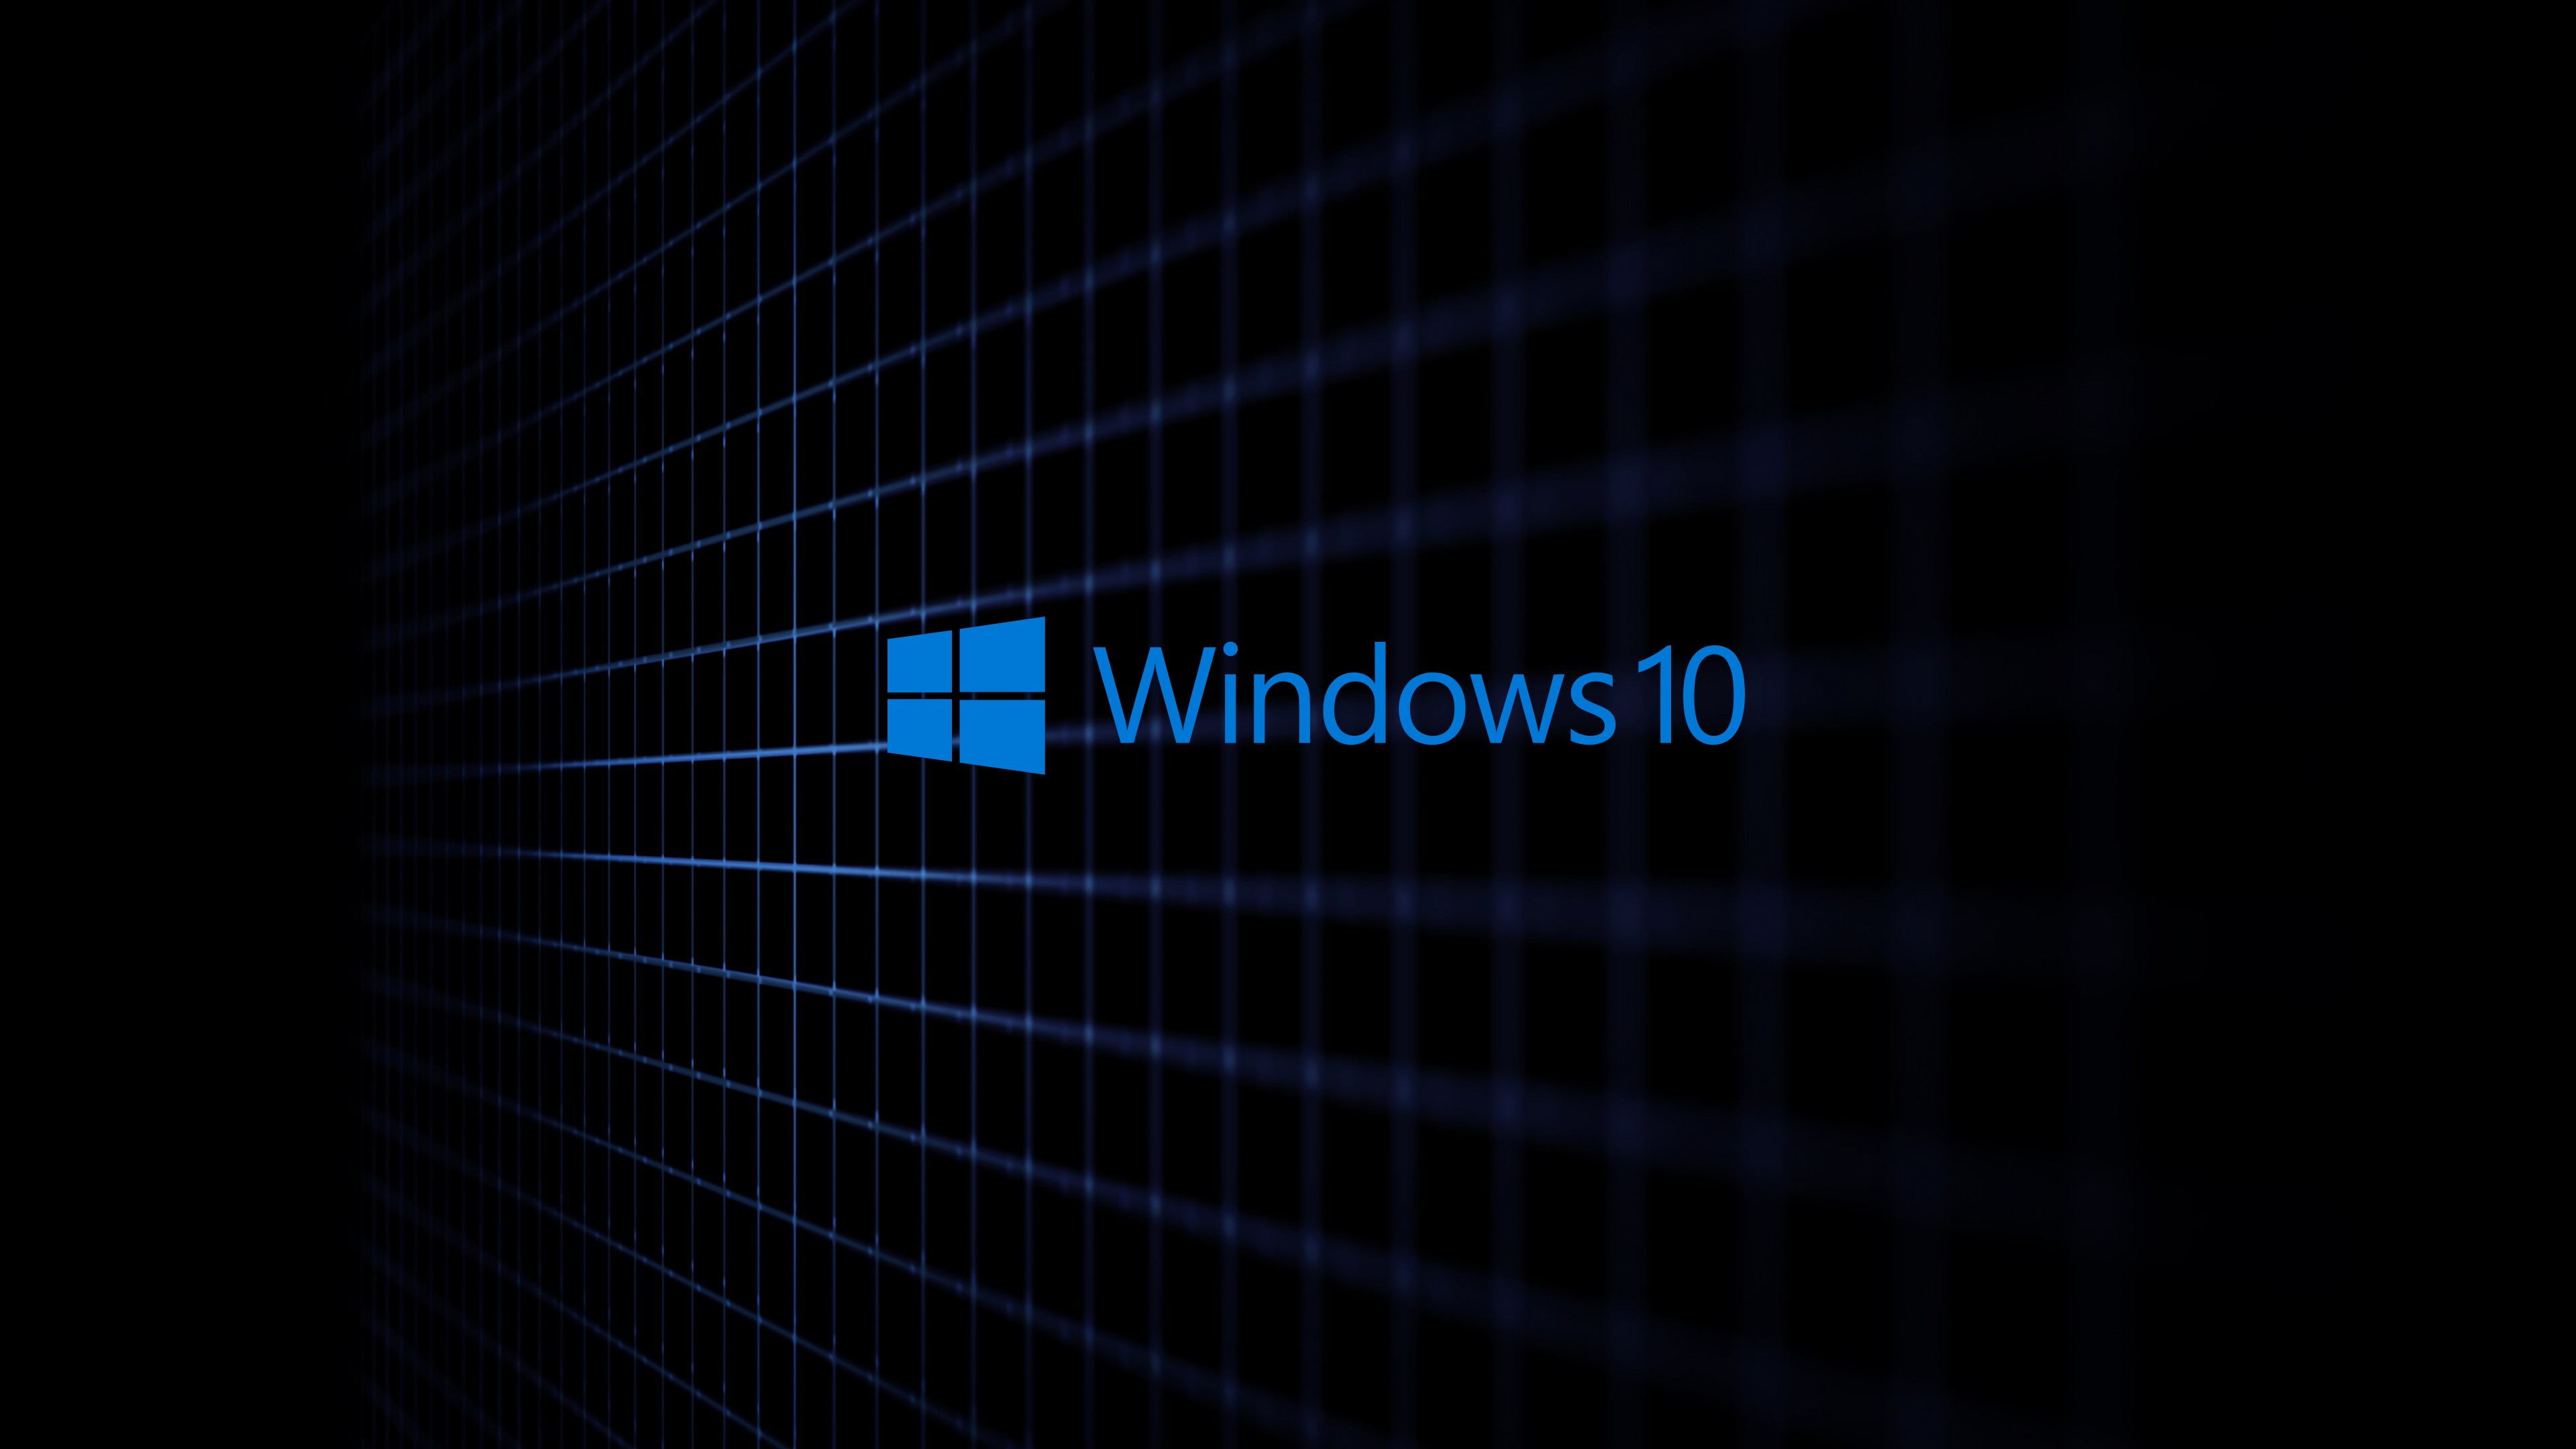 Windows-10-3D-Black-Wallpaper-with-Abstract-Grid-Lines-for-Desktop 